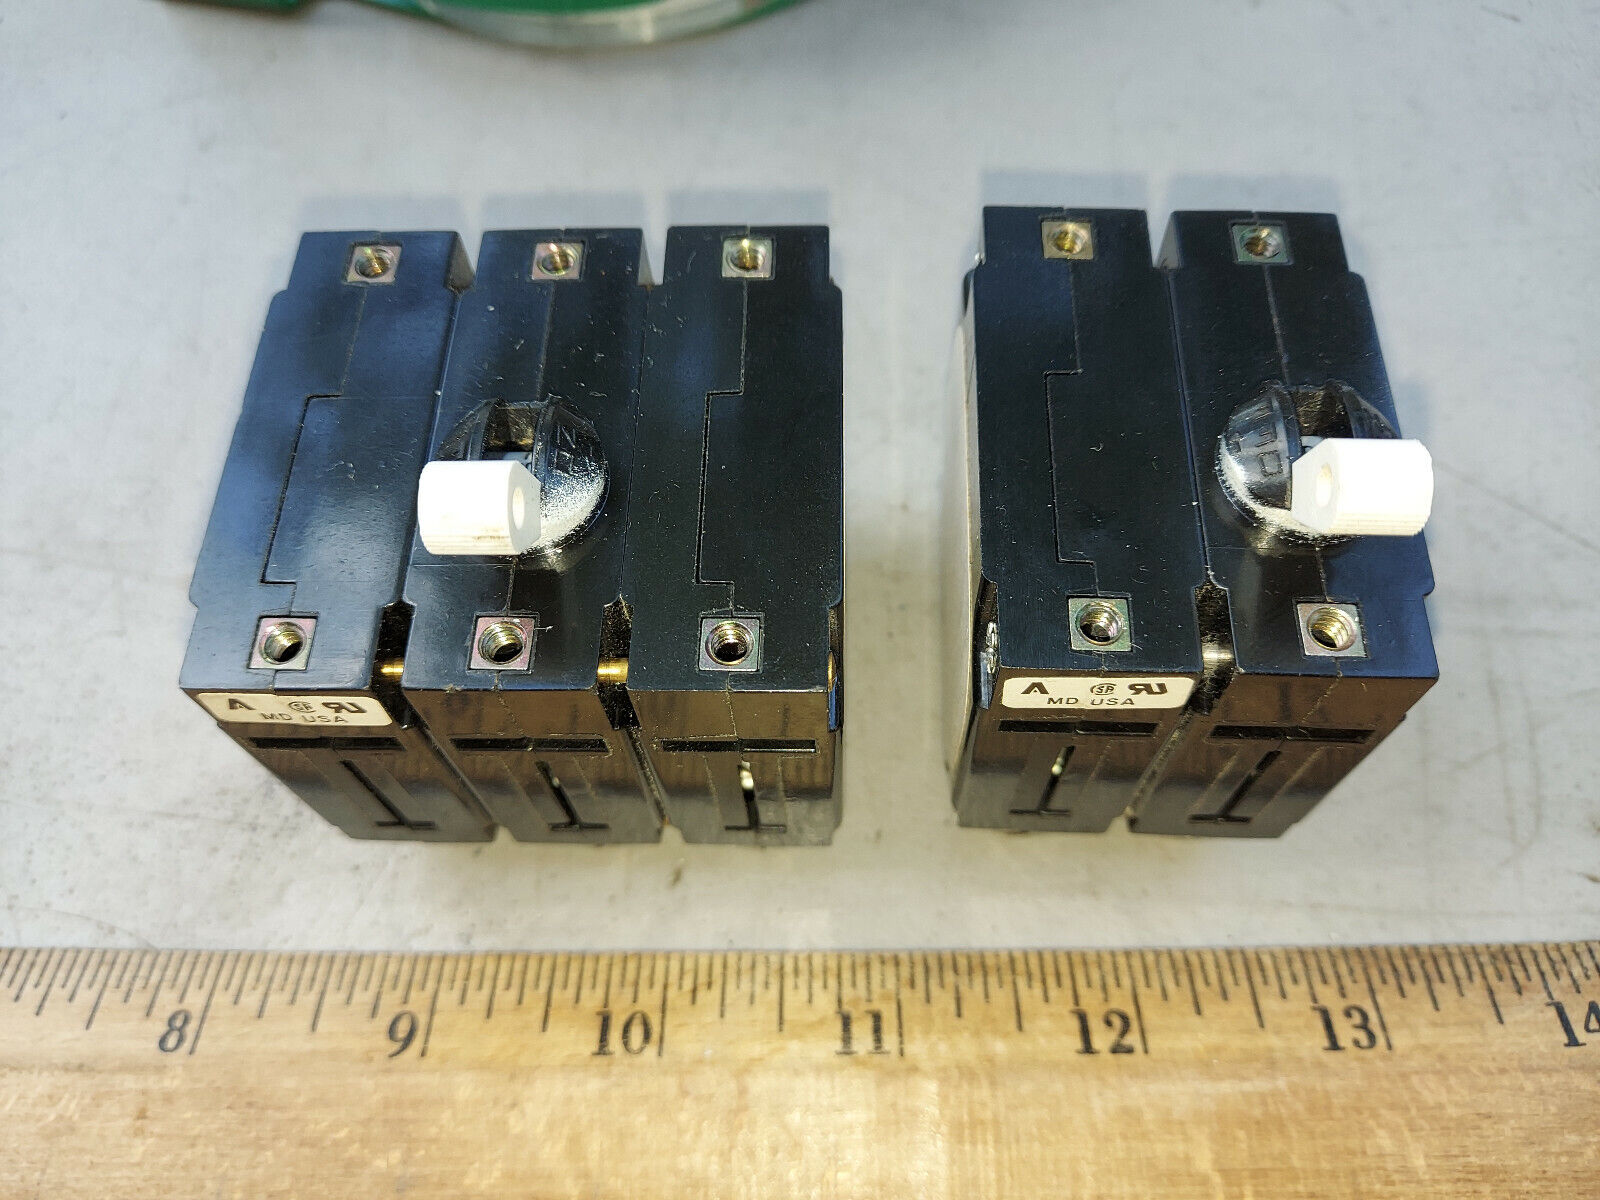 21UU75 GANGED SWITCHES: AIRPAX IEG166 & IEG66, VERY GOOD CONDITION